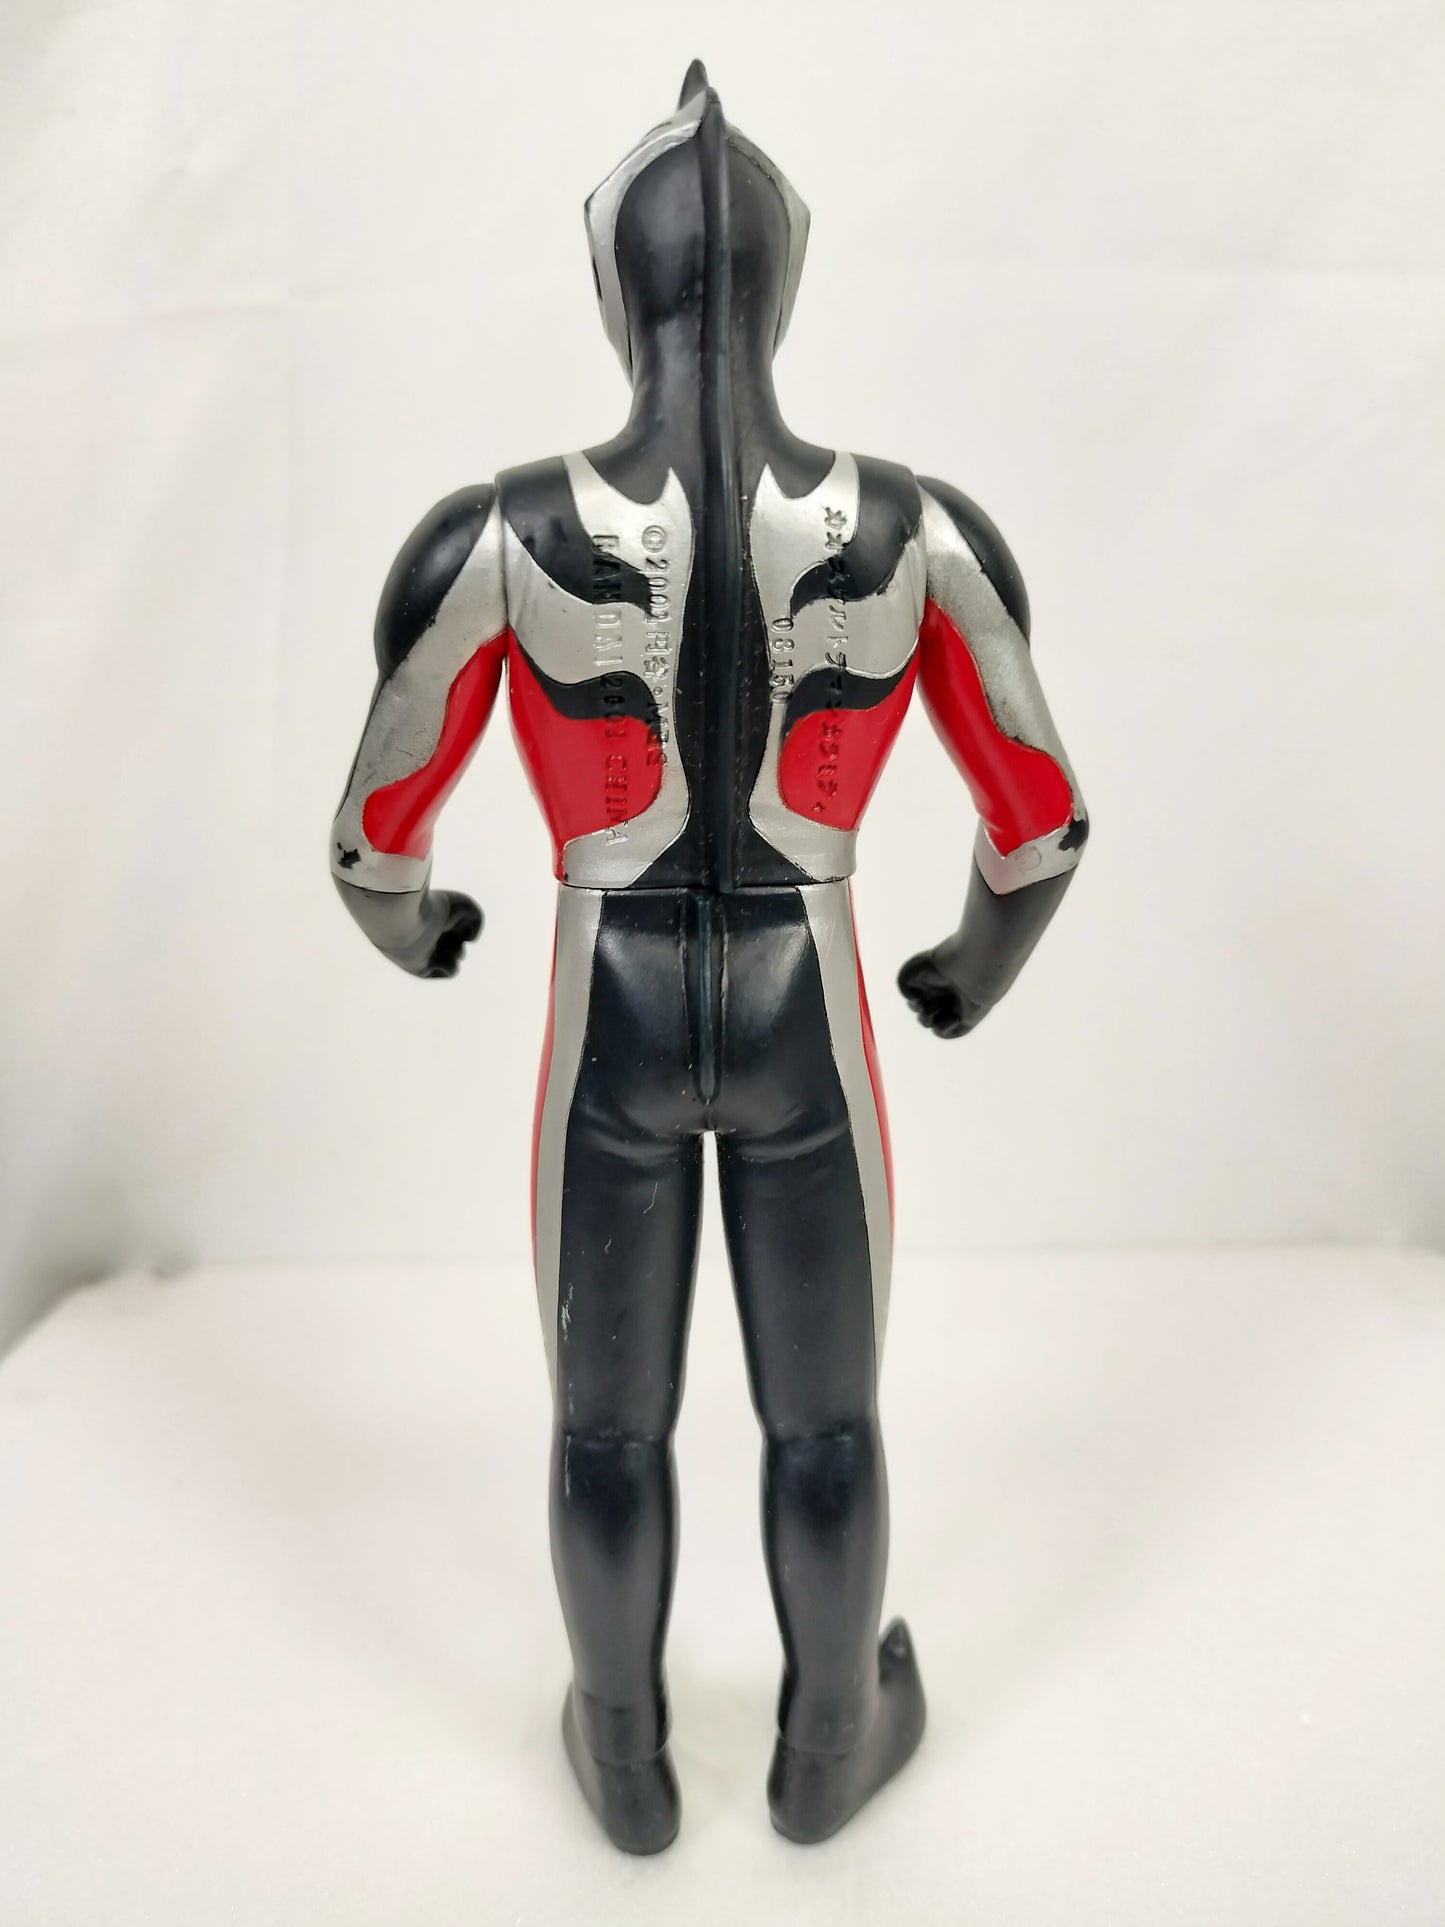 Chaos Ultraman Calamity Made in China Height about 16cm Manufactured in 2002 Sofvi Figure retro vintage major scratches and dirt